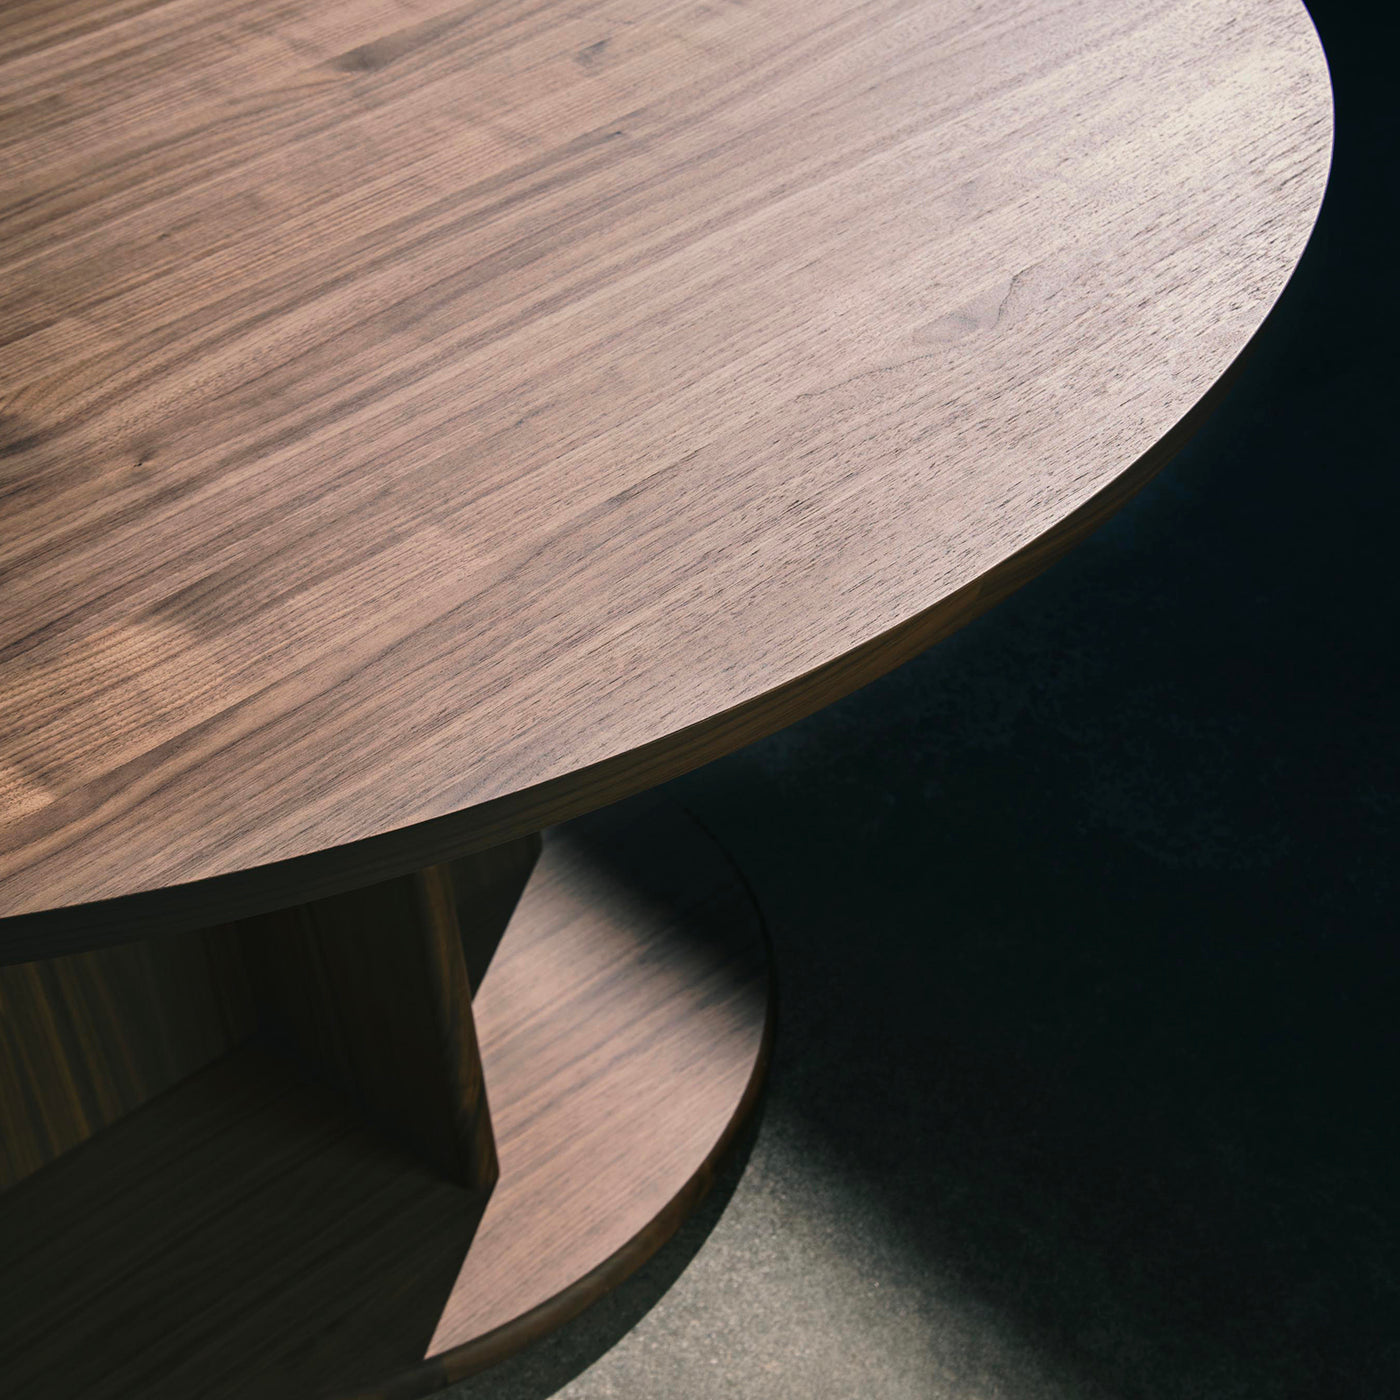 Intersection Round Dining Table by Neri&Hu - Alternative view 2